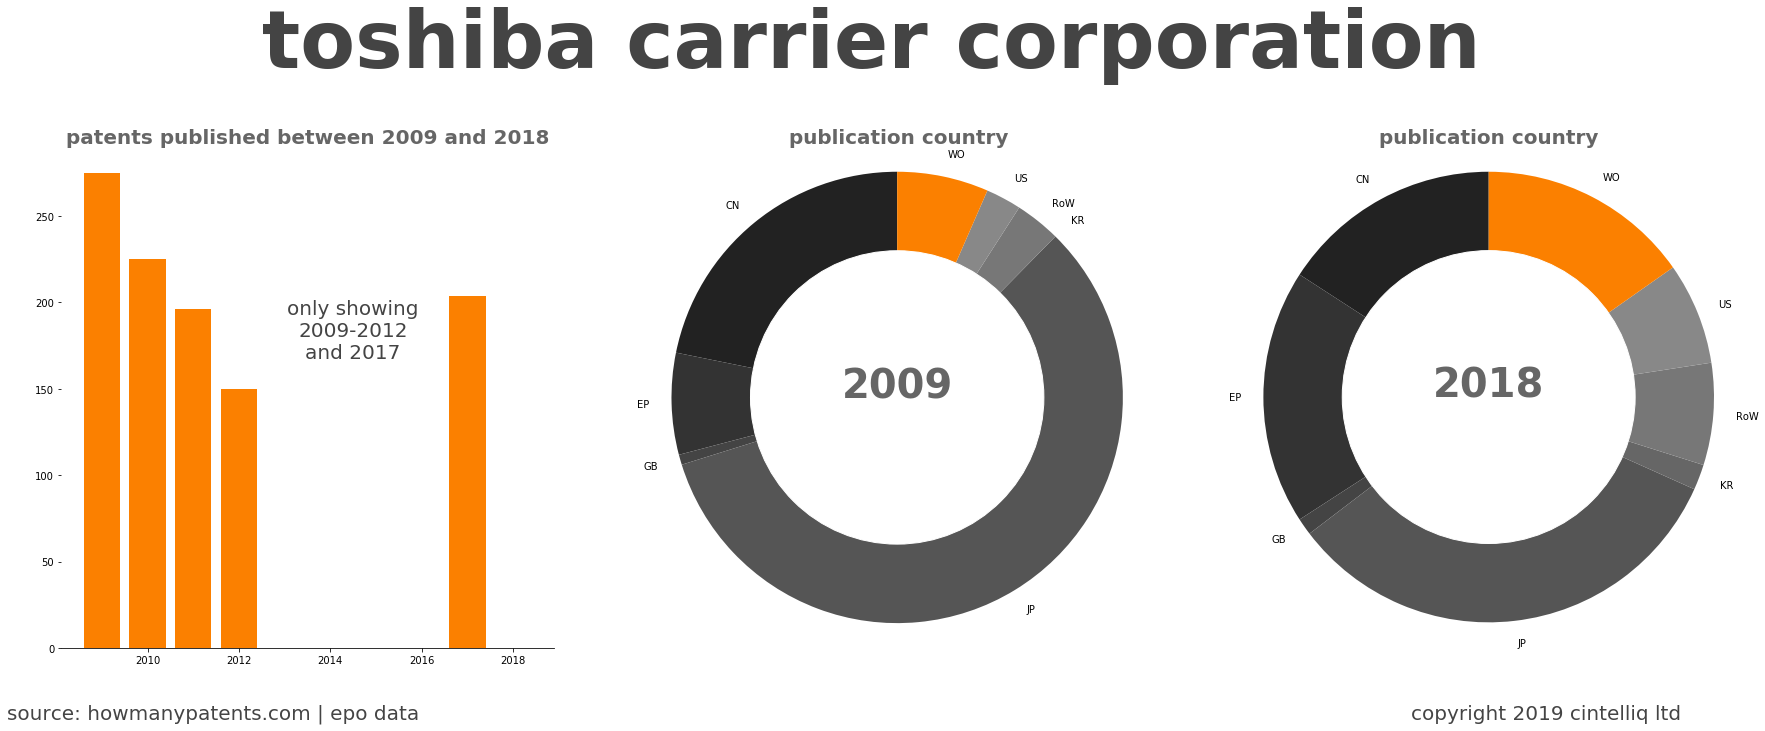 summary of patents for Toshiba Carrier Corporation